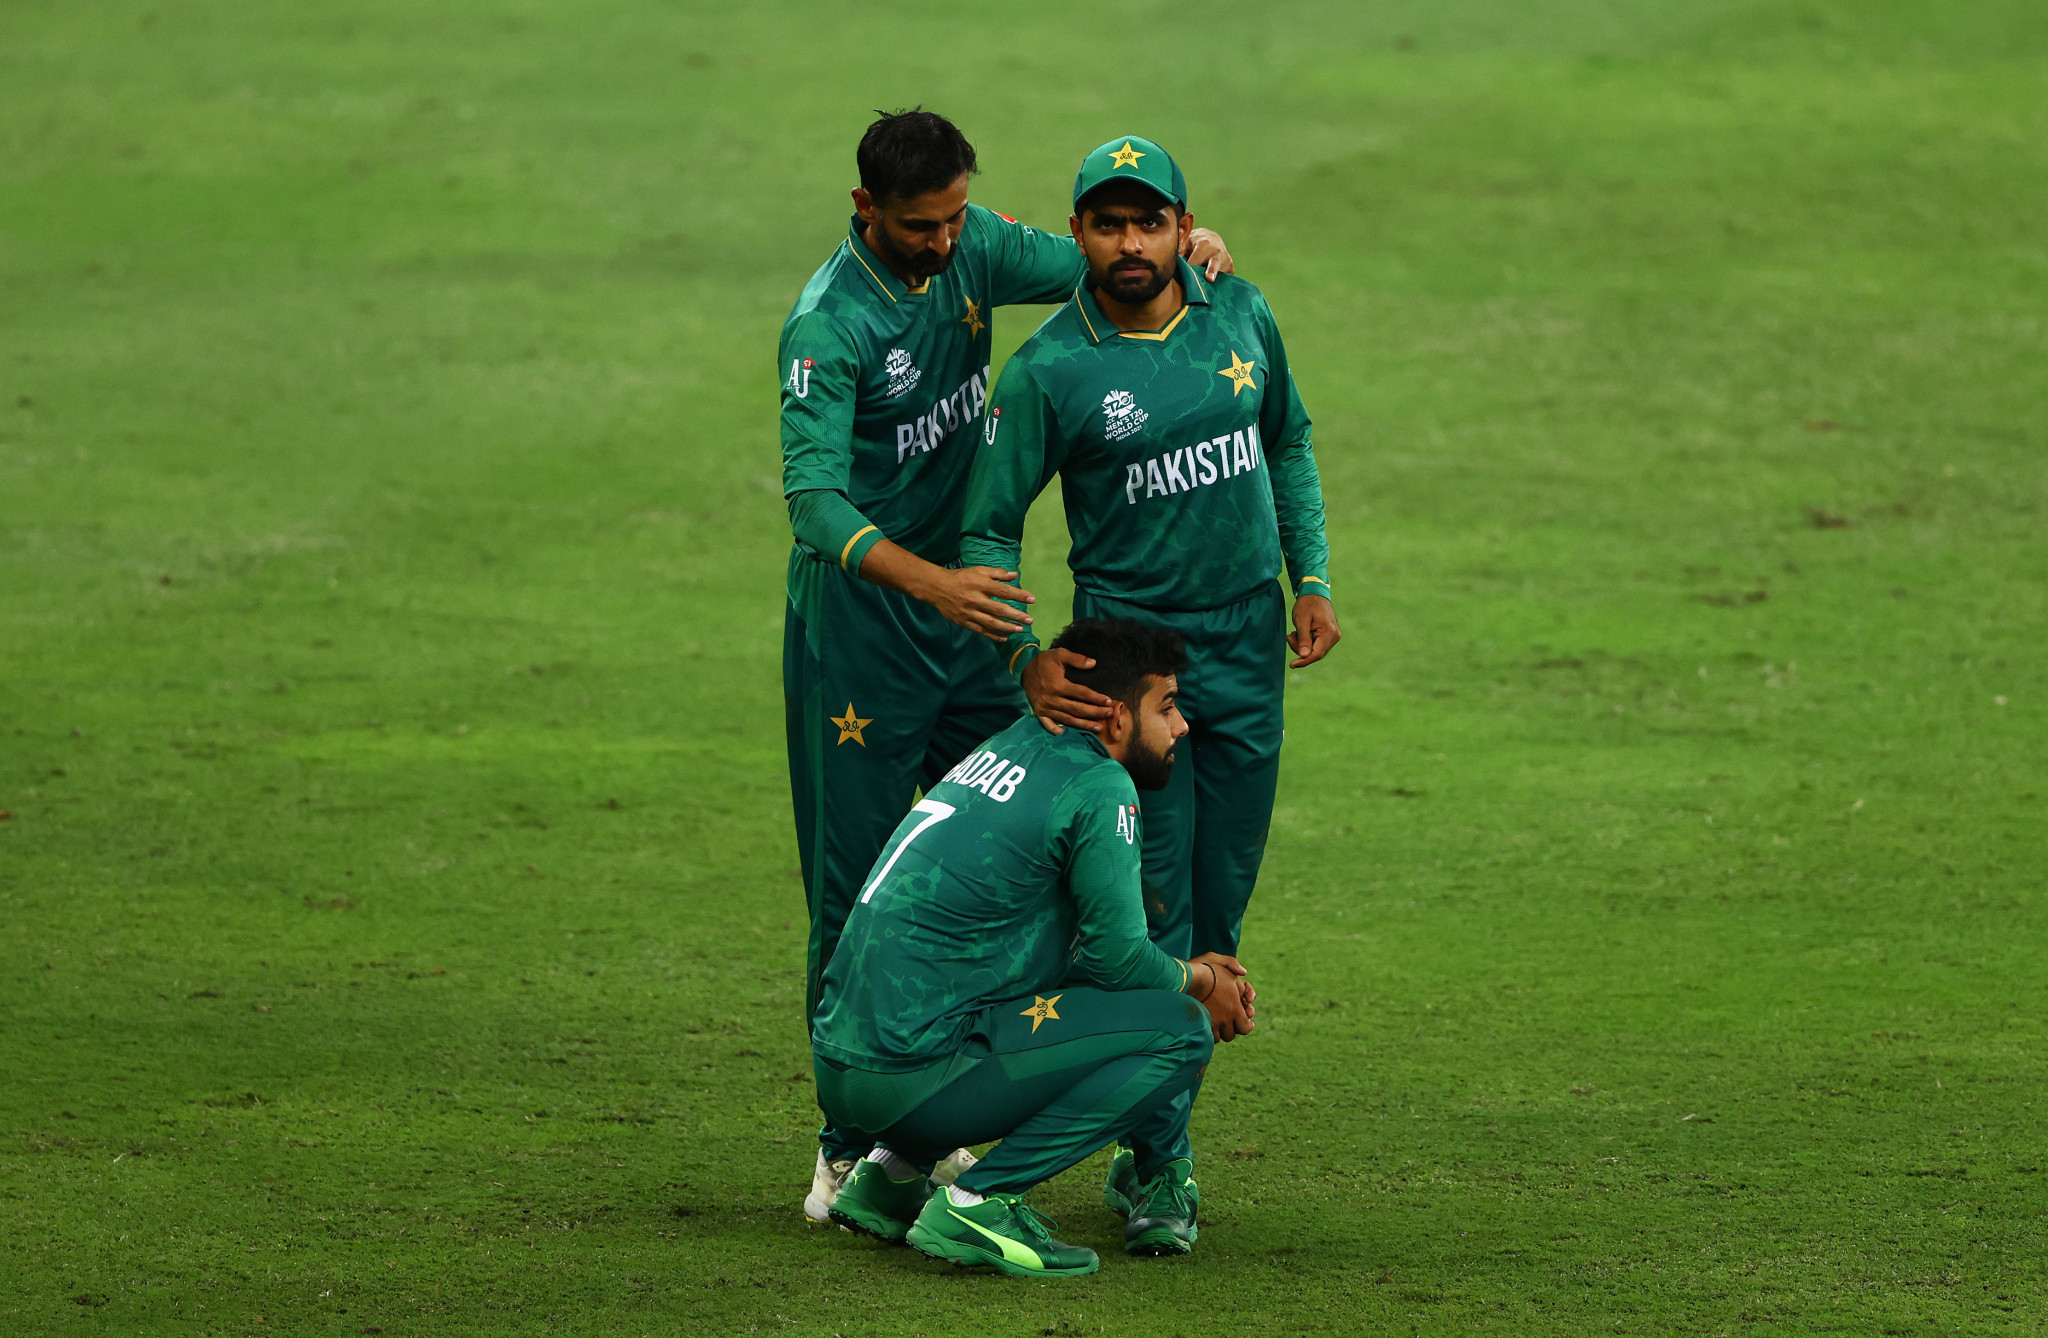 Pakistan were unbeaten heading this semi-final, and had been the tournament's standout team ©Getty Images